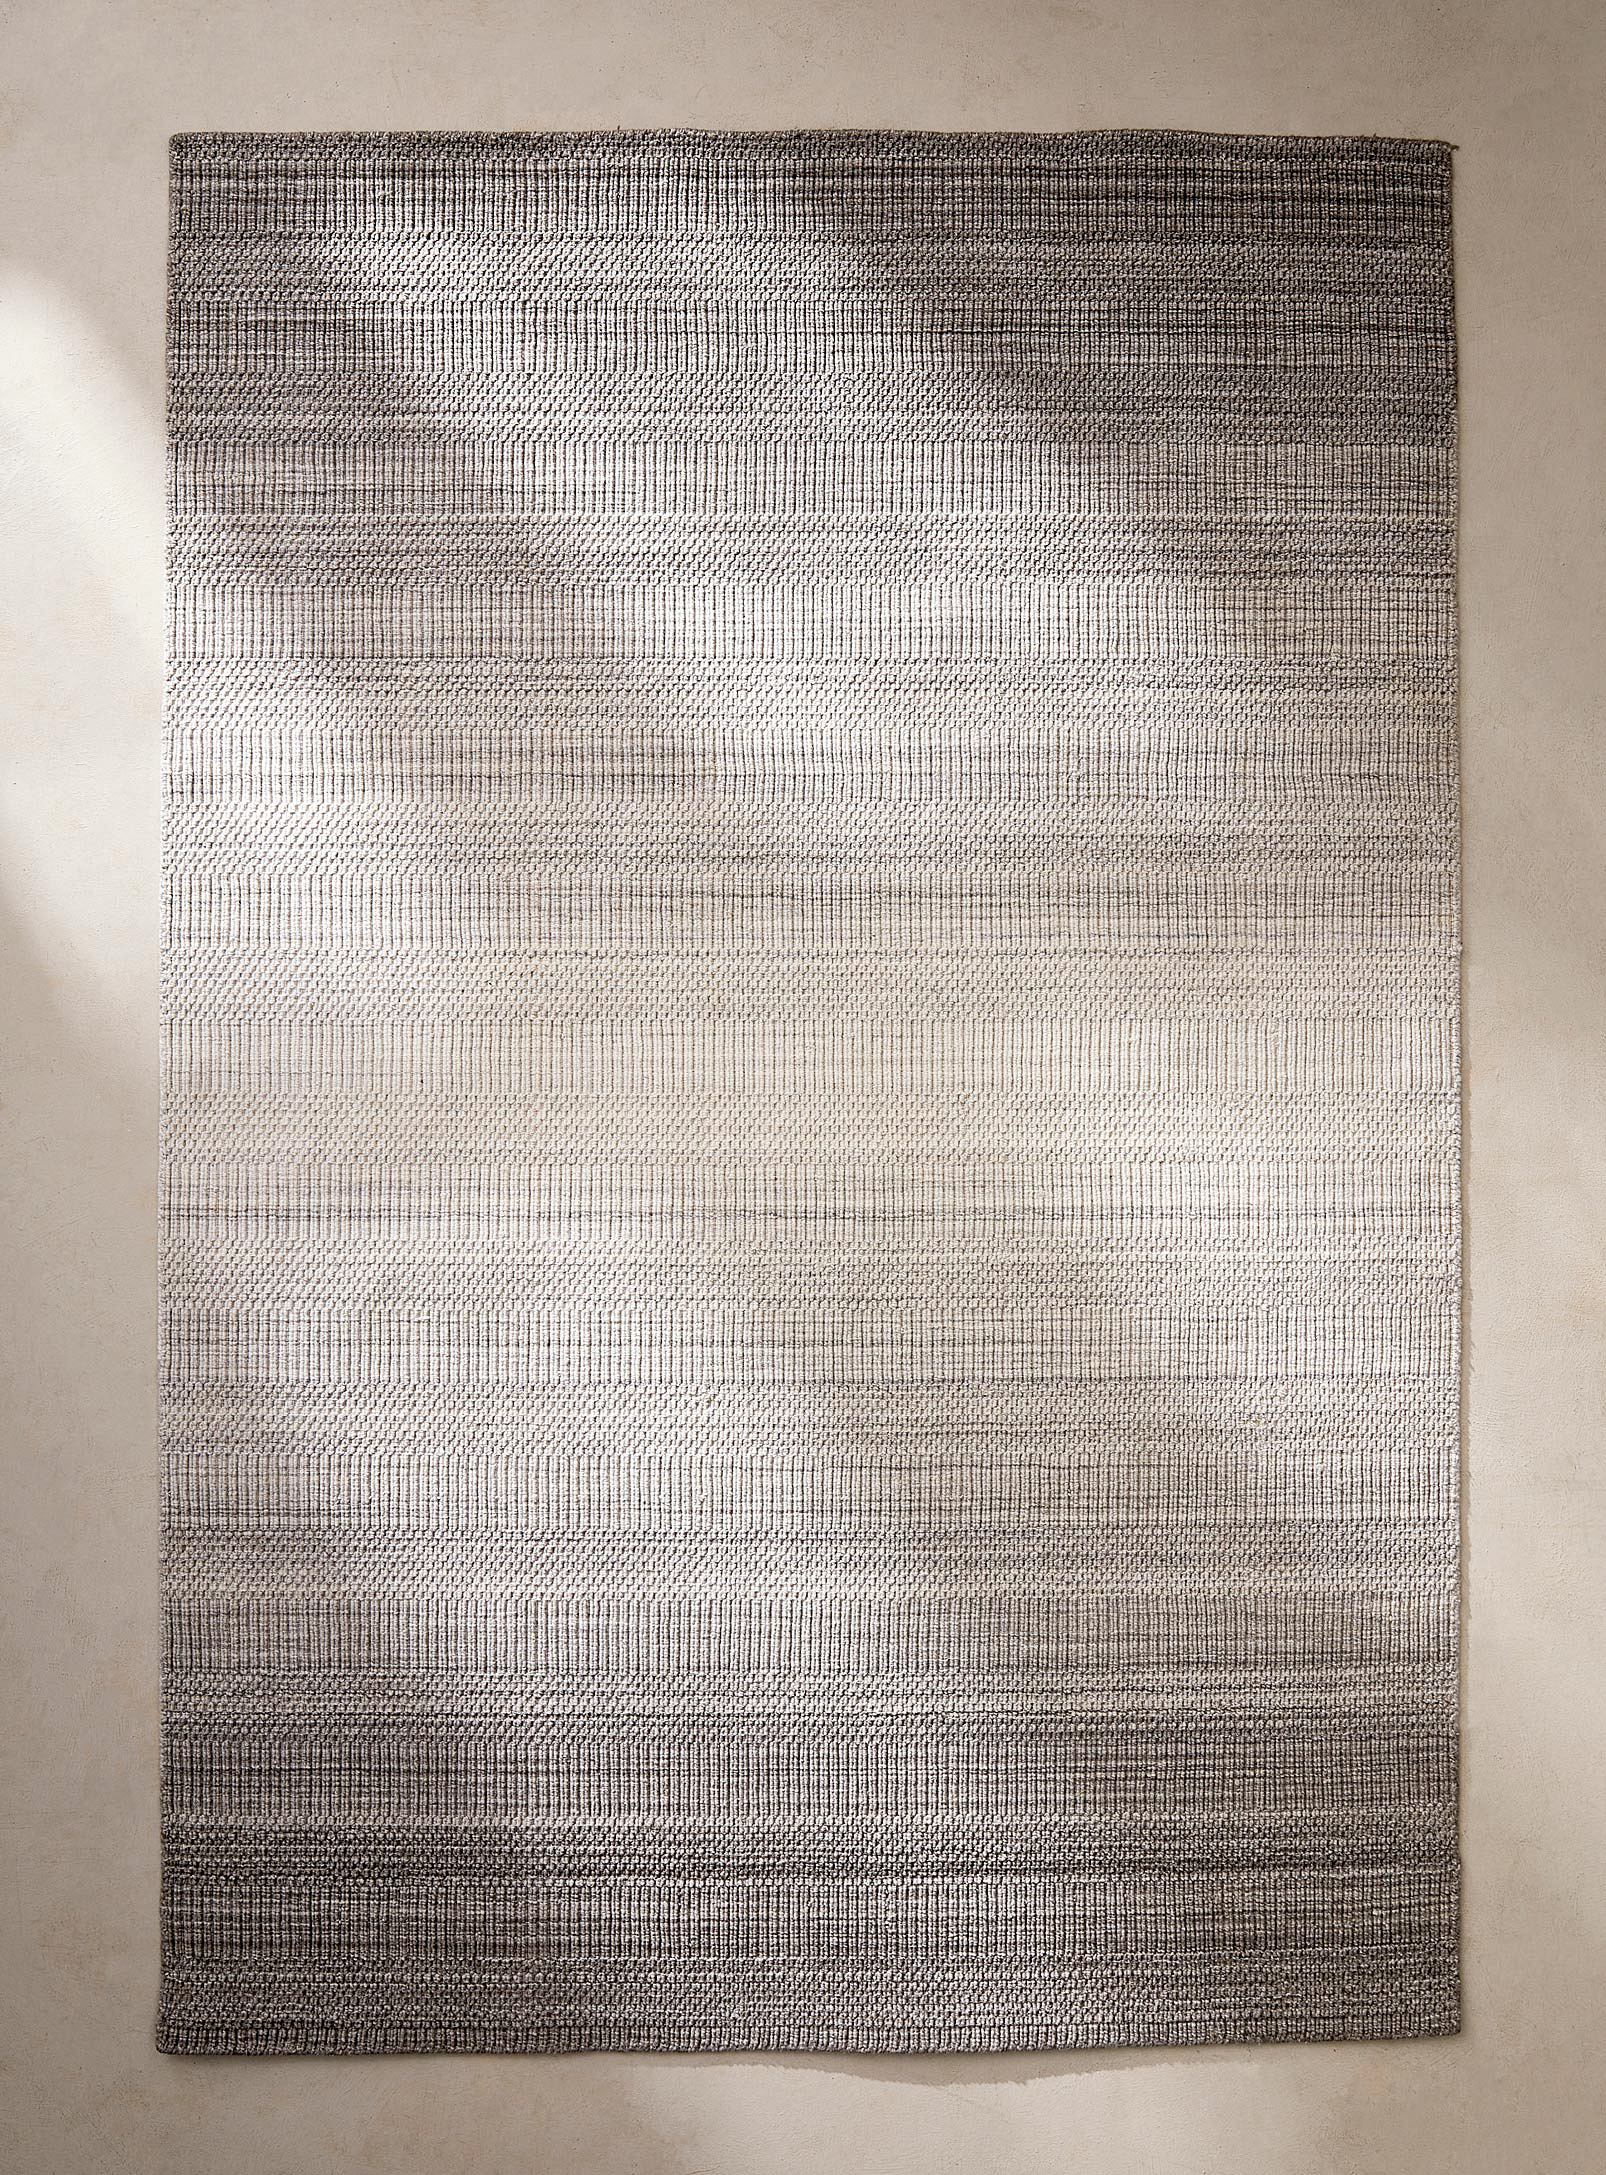 Simons Maison - Recycled polyester variegated artisanal rug See available sizes